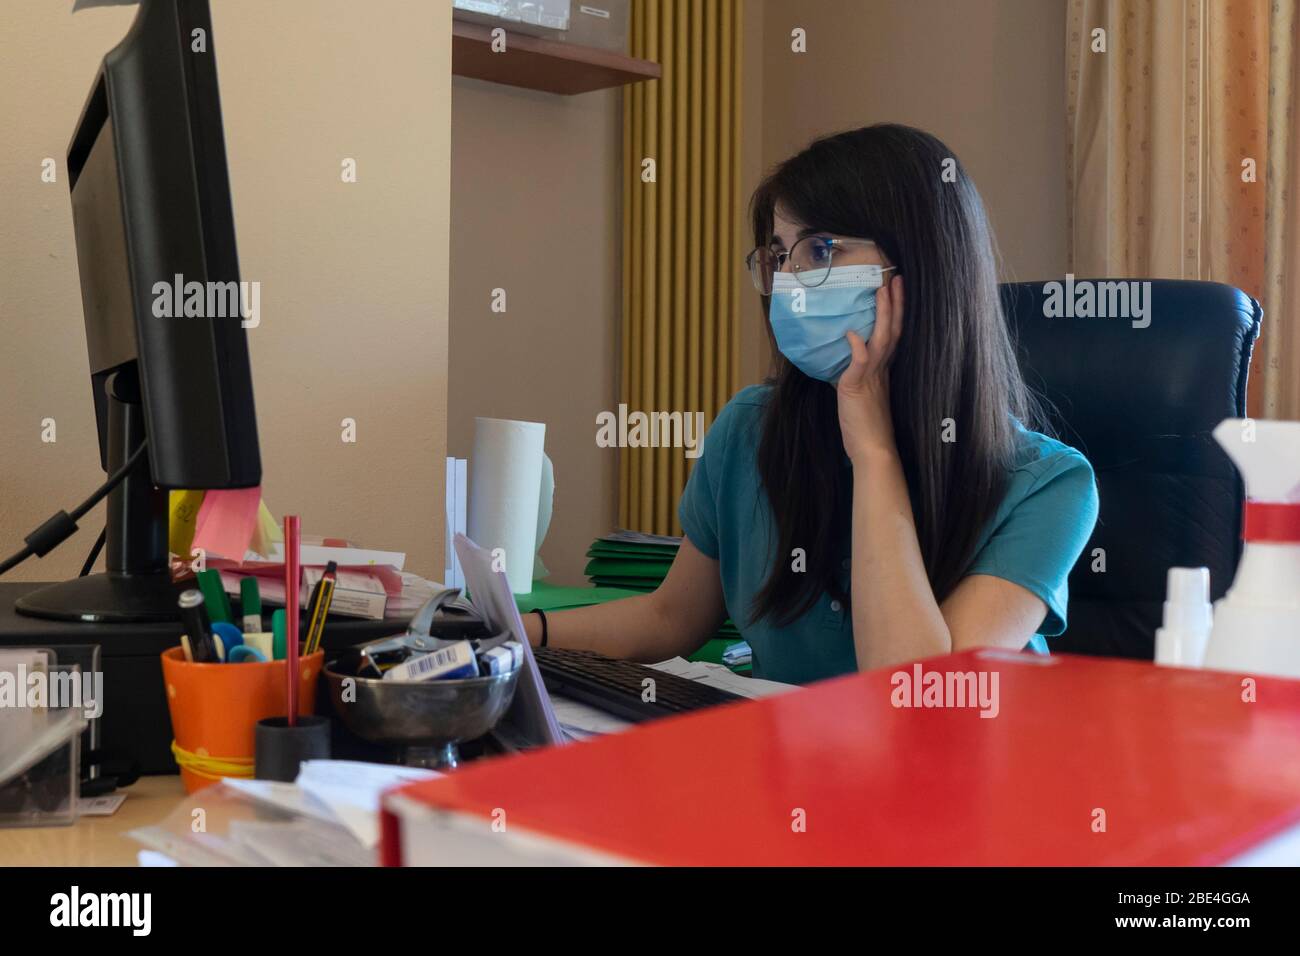 Employee works in the office with the mask to prevent infection during the virus quarantine. Stock Photo